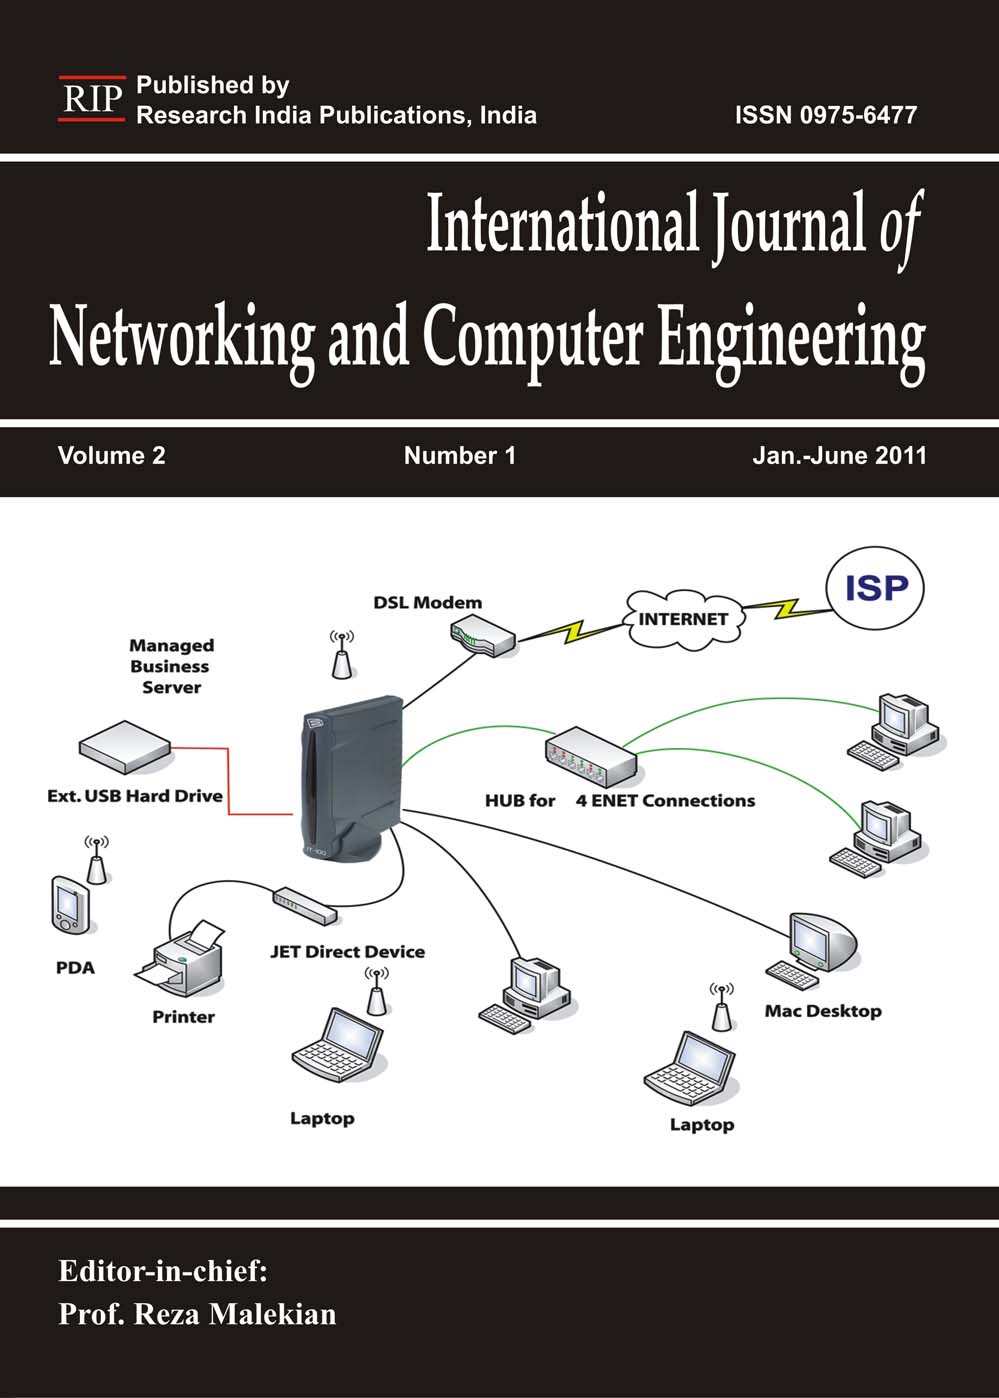 International Journal of Networking and Computer Engineering